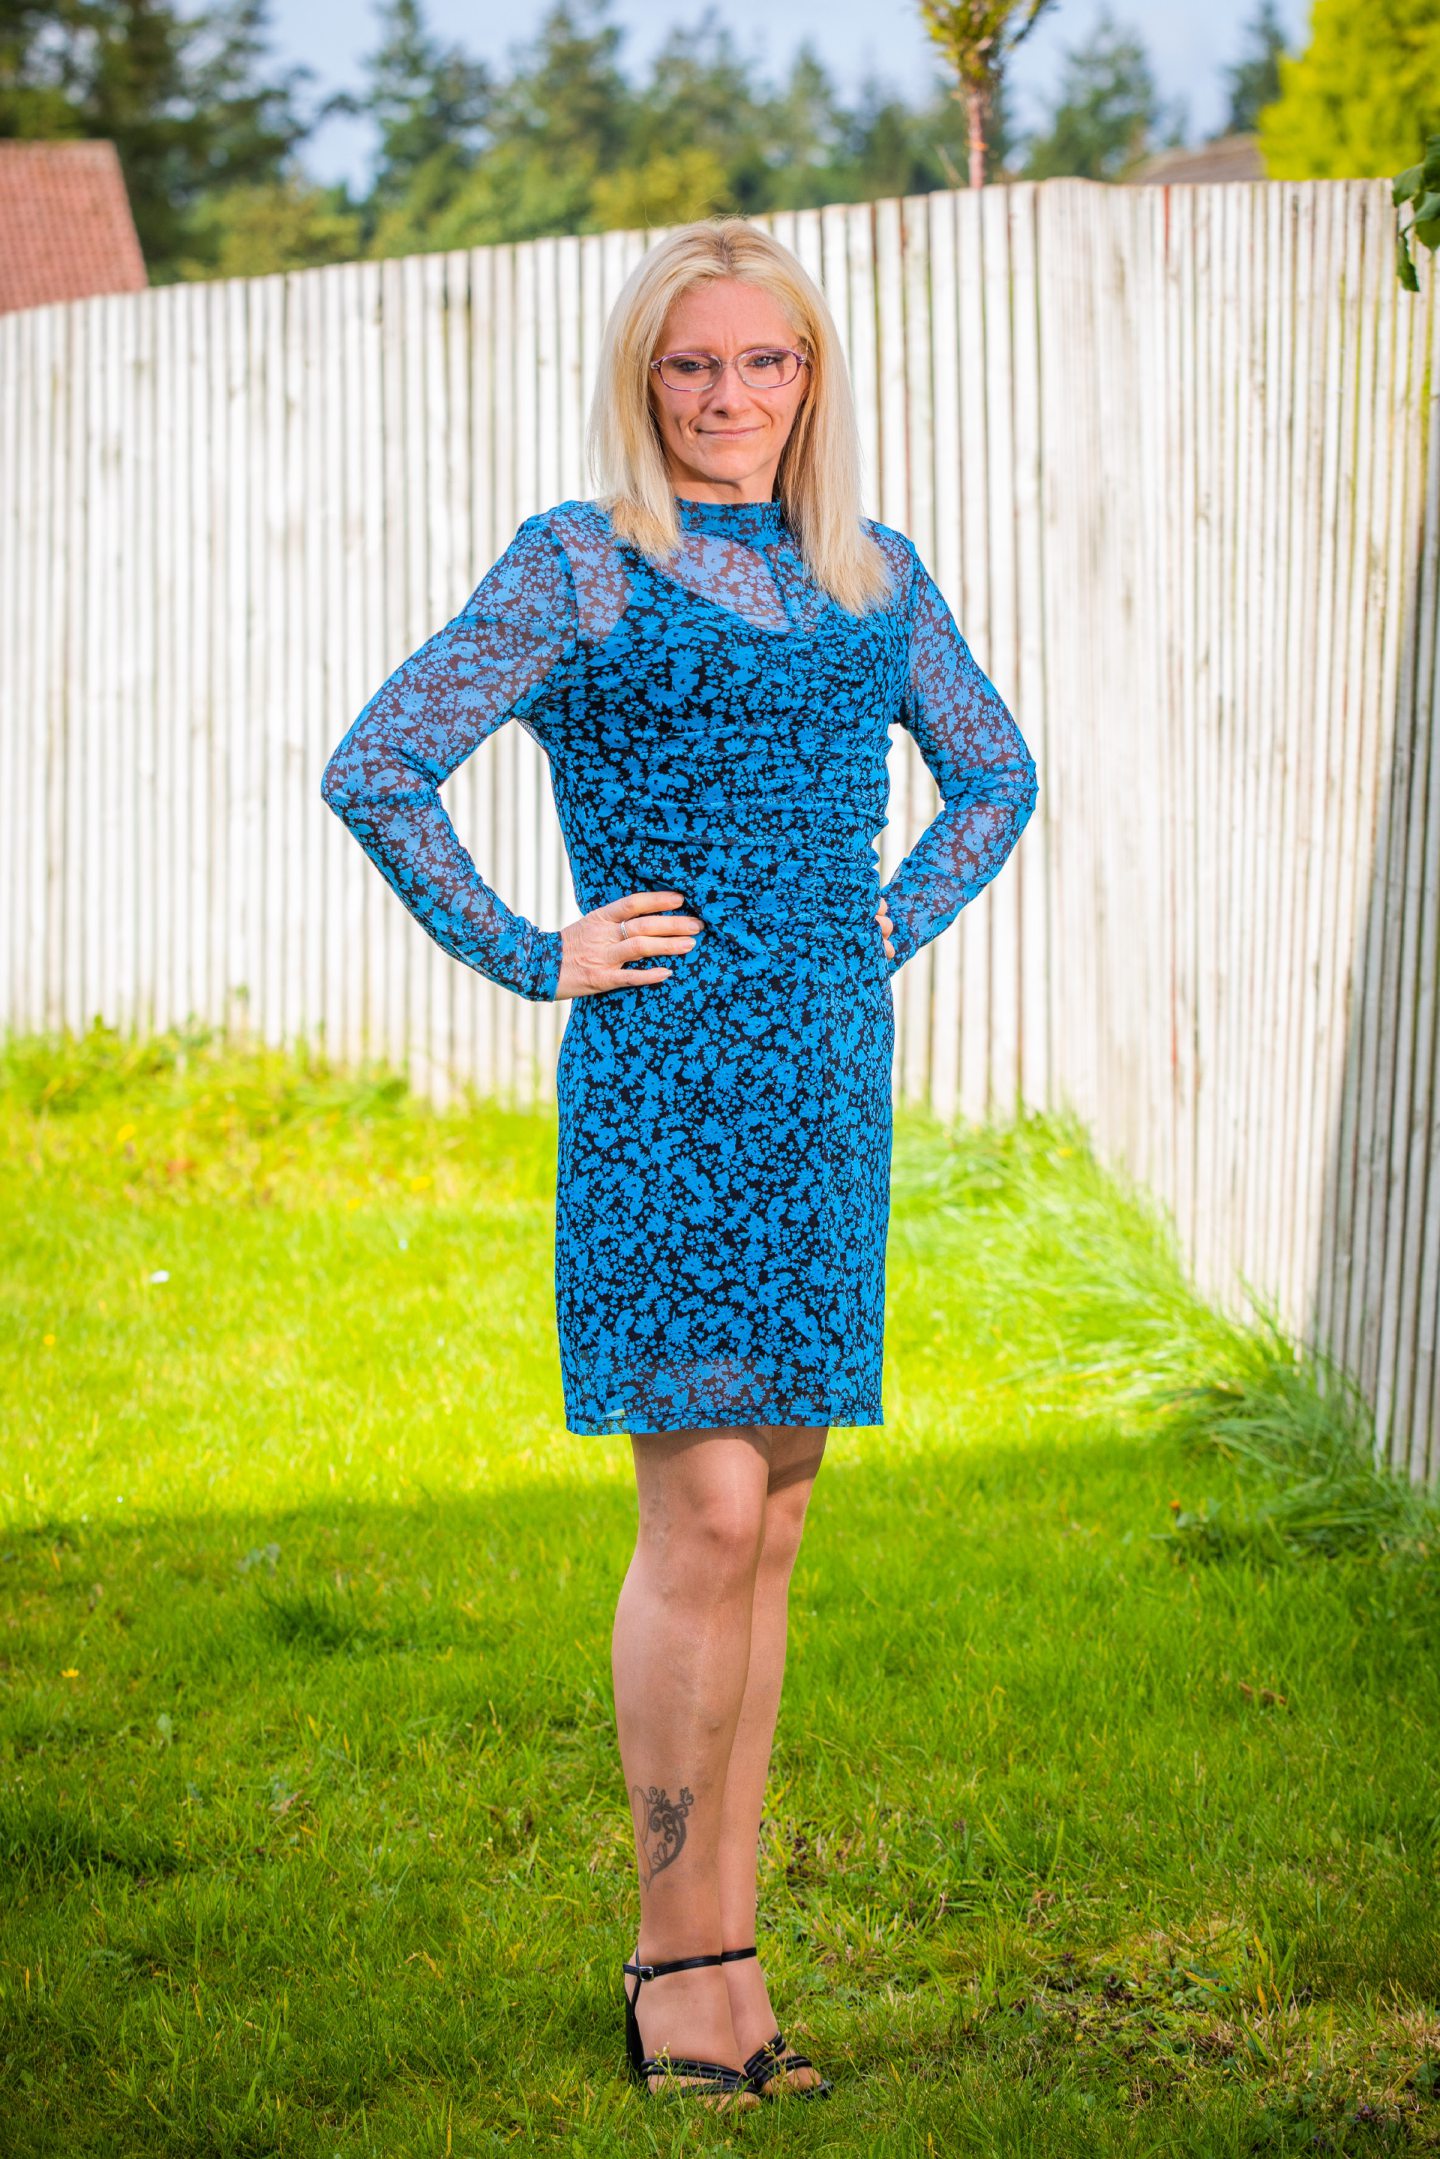 Dundee mum Kelly has lost over nine stones since she re-joined Slimming World in 2021